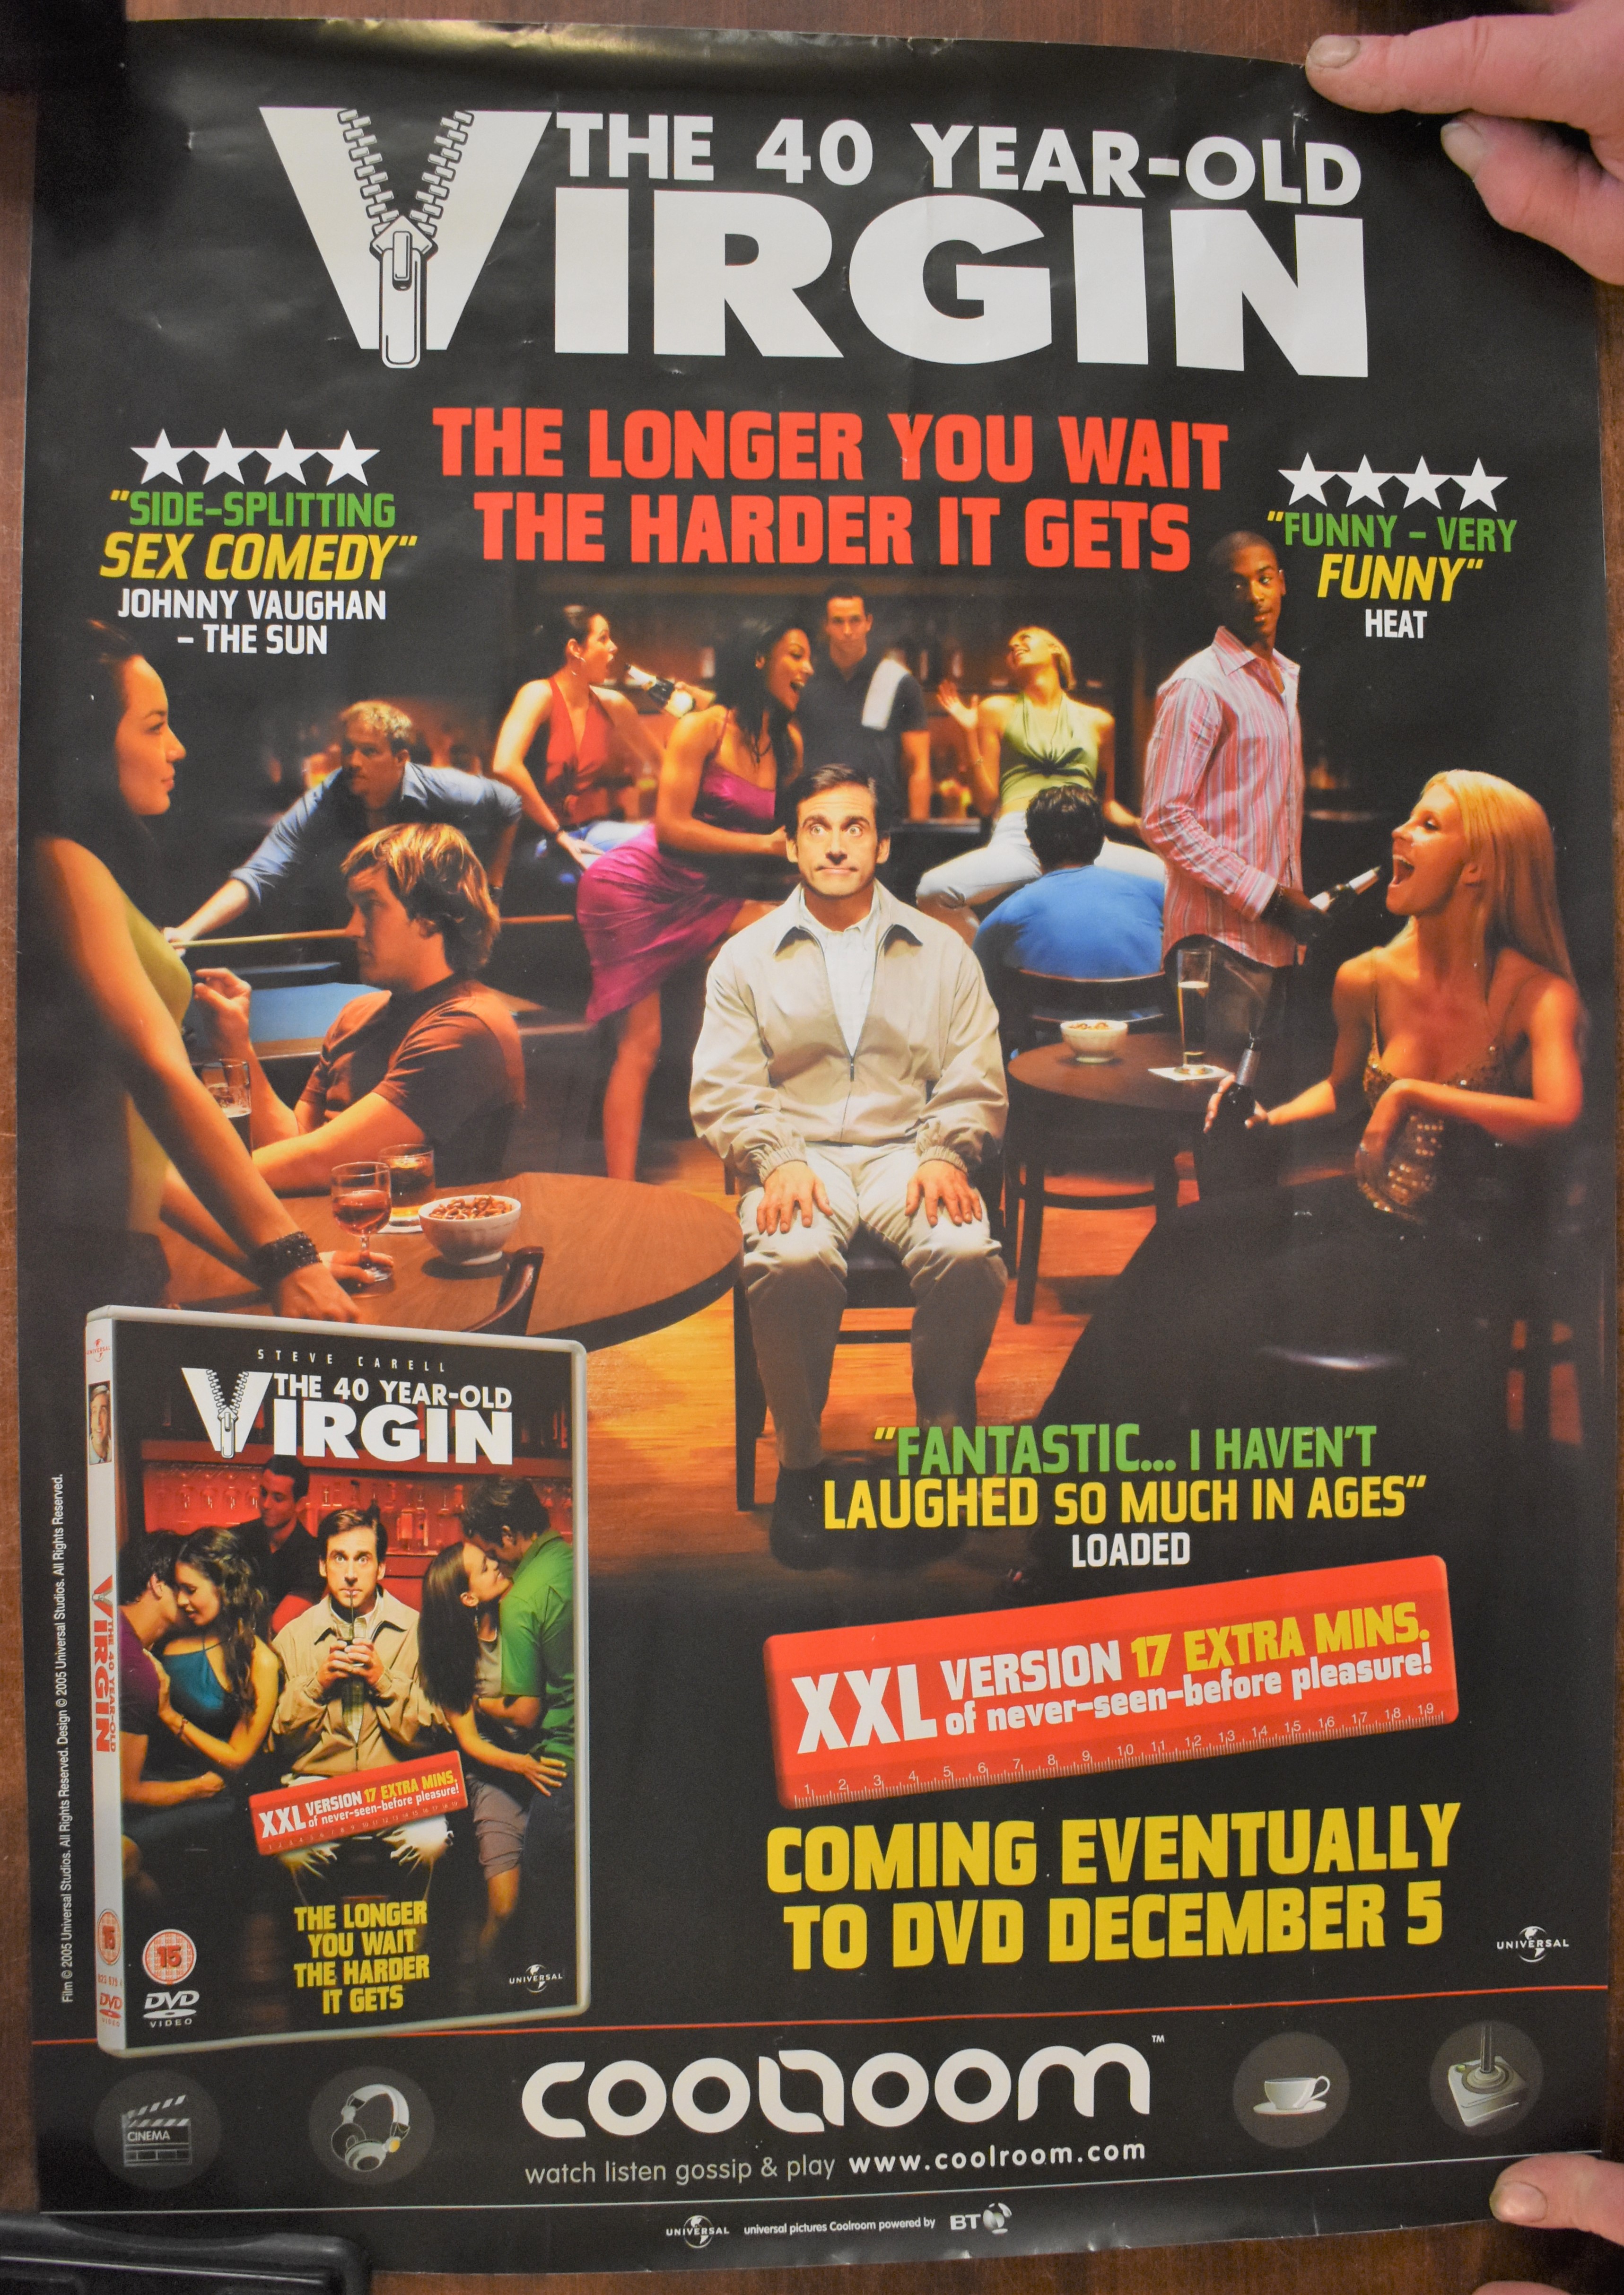 The 40 Year of Virgin - Cinematic Poster, starring Steve Carell and Paul Rudd, released Sept 2nd